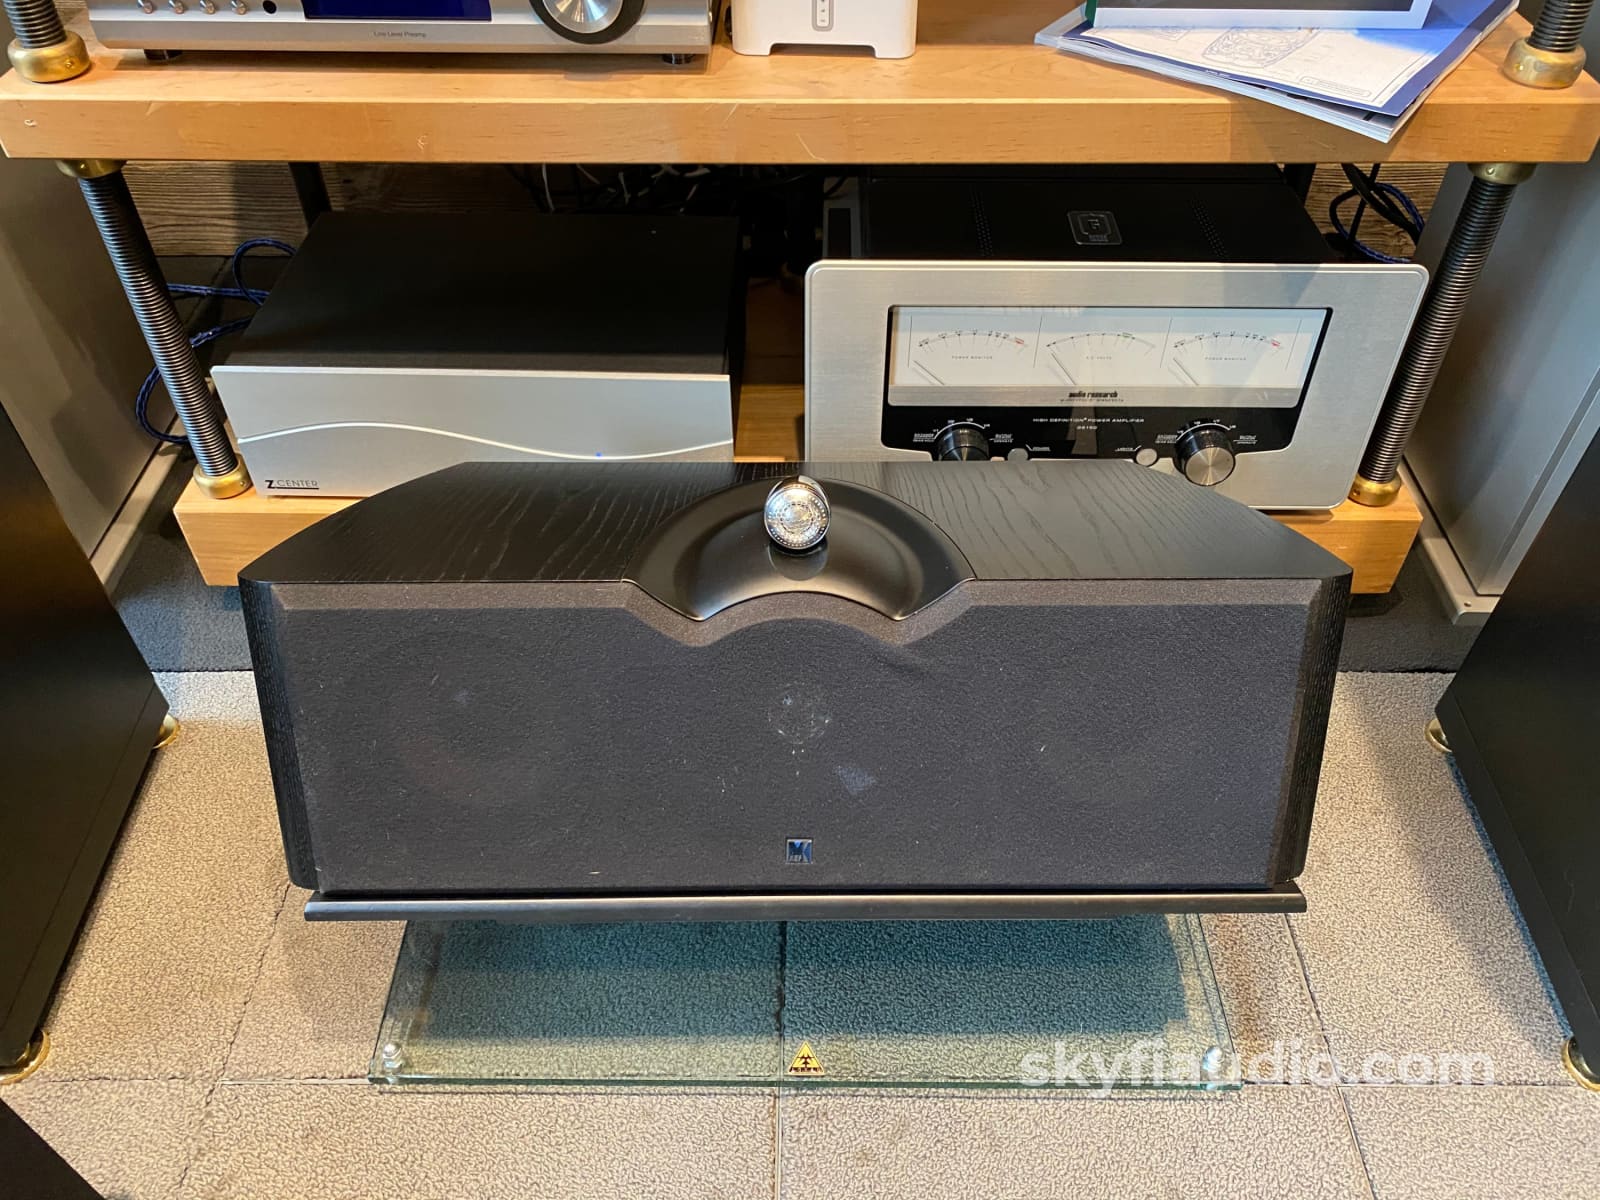 Kef Reference Home Theater Speaker System Package - Model Three-Two 202C And Tdm34Ds Speakers